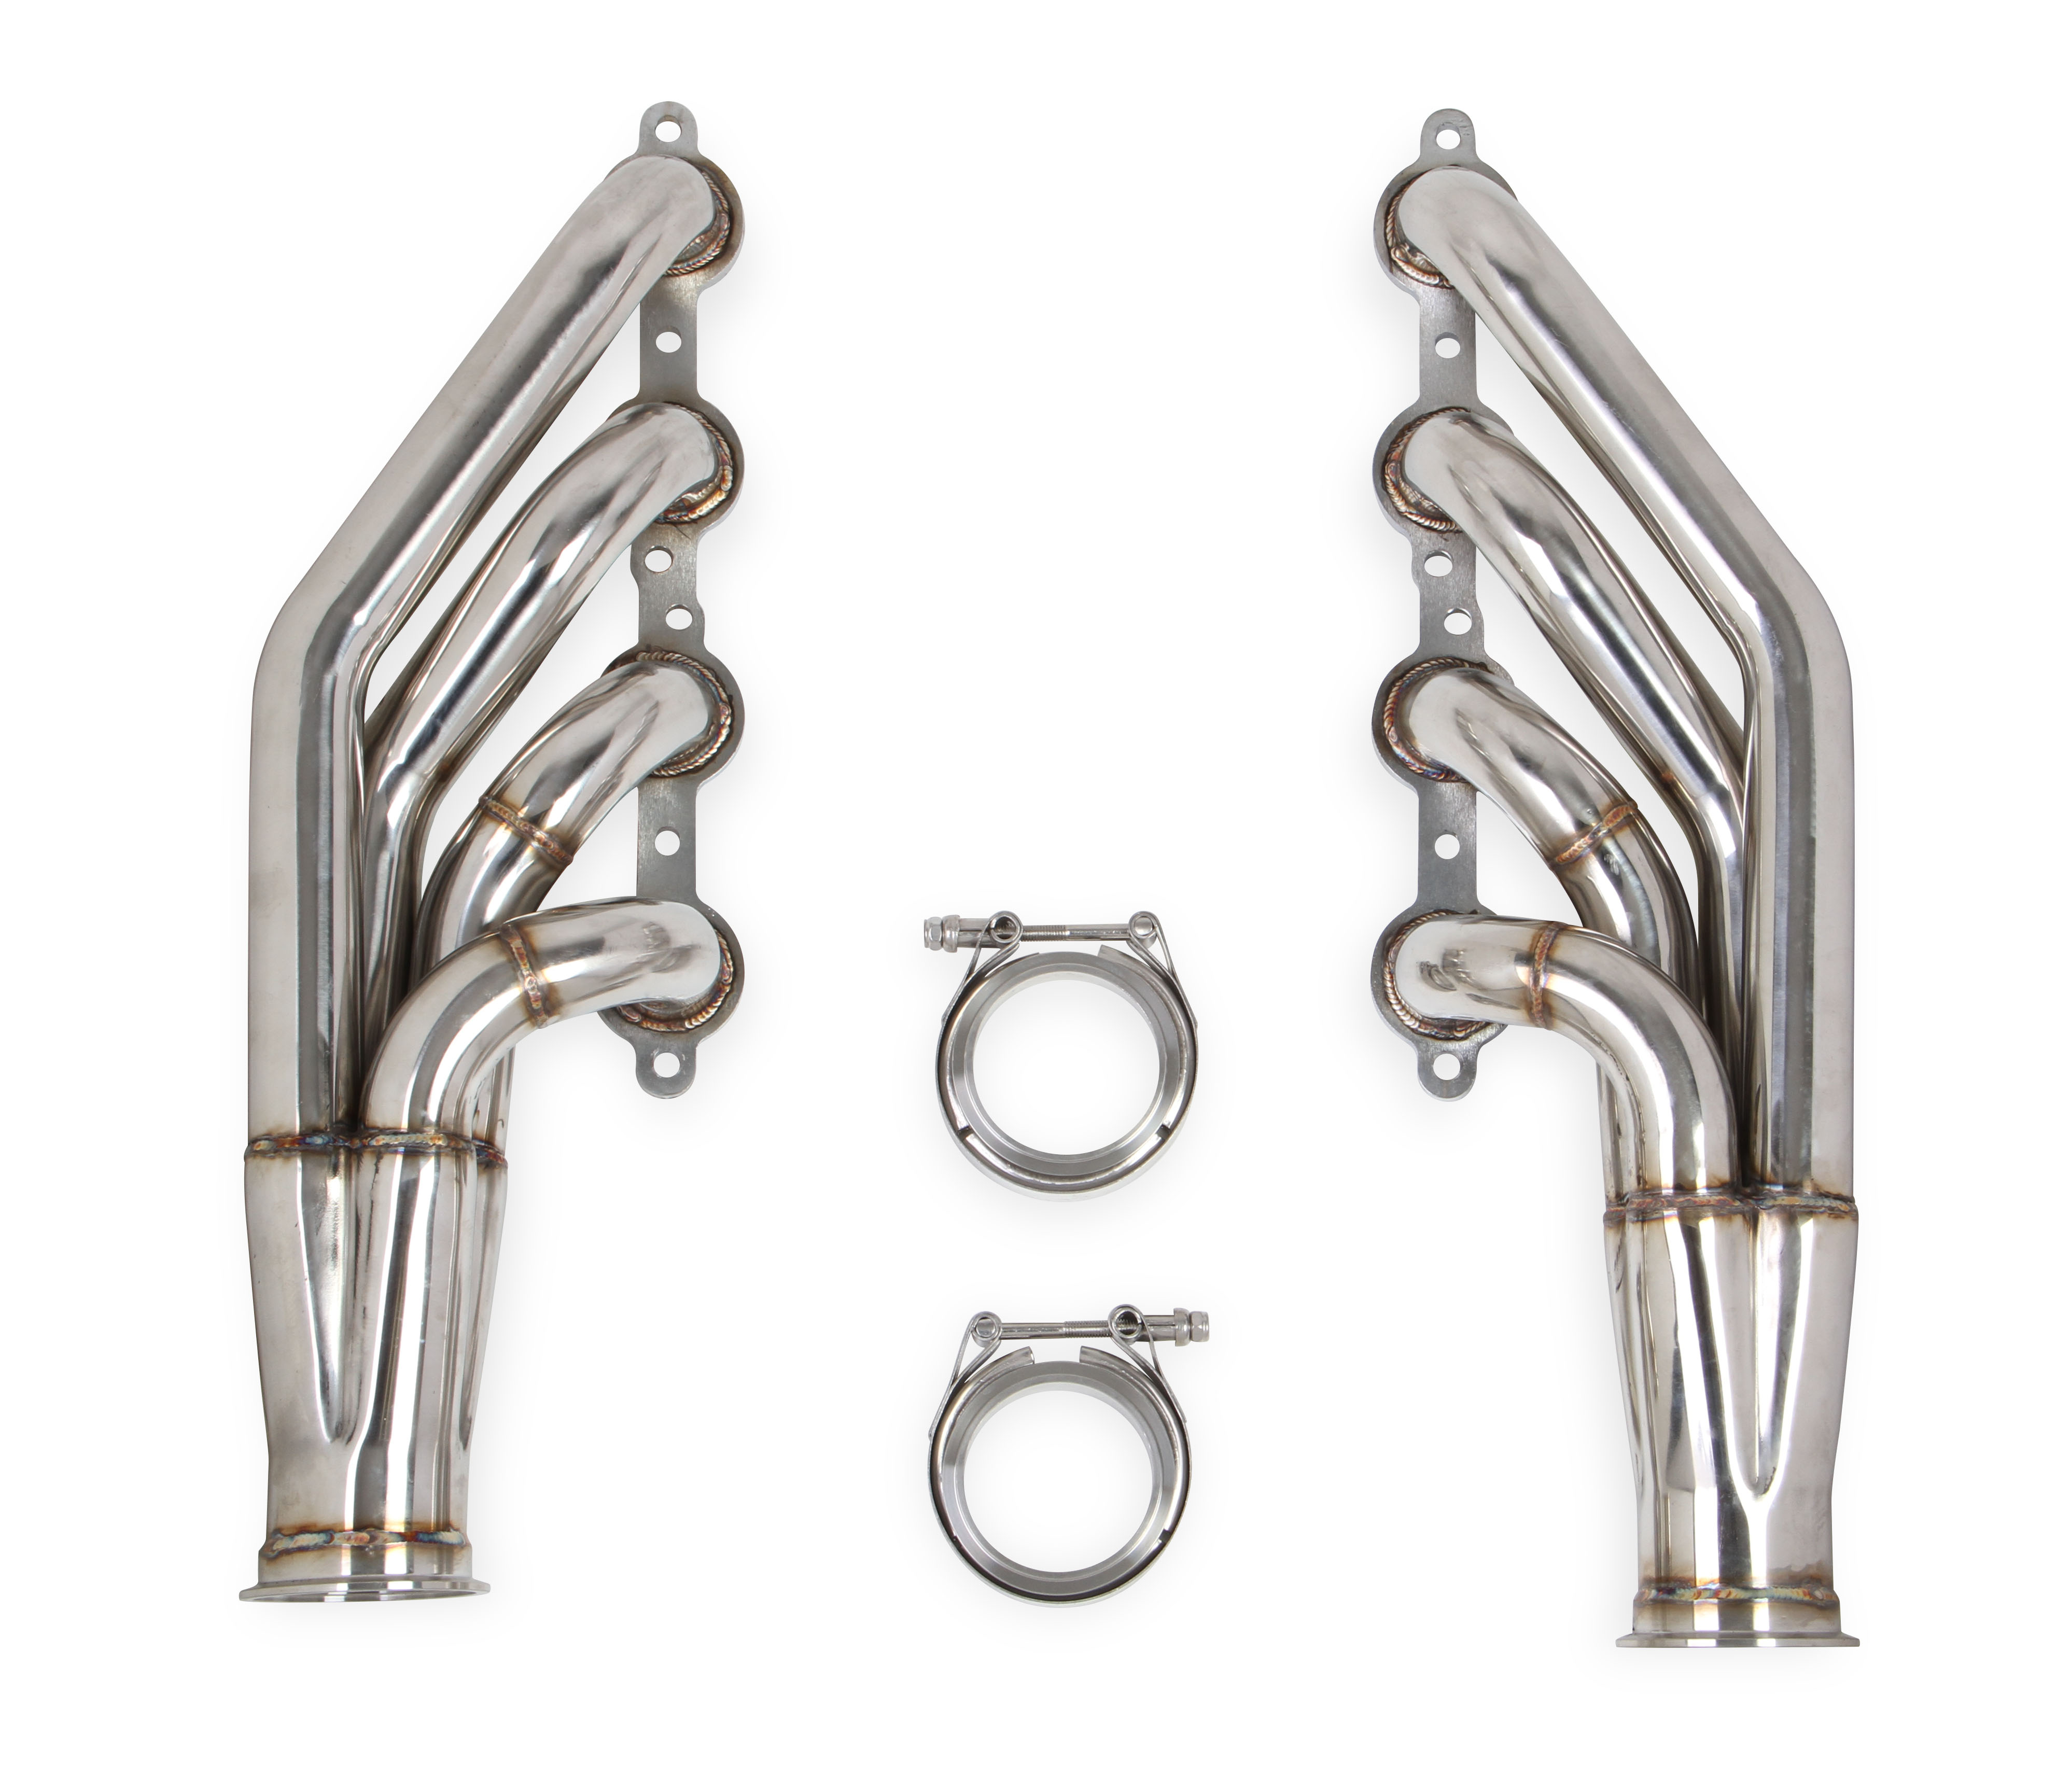 Flowtech LS 4.8L/5.3L/6.0L V8 1 3/4" 409 Stainless Turbo Headers - Painted Black